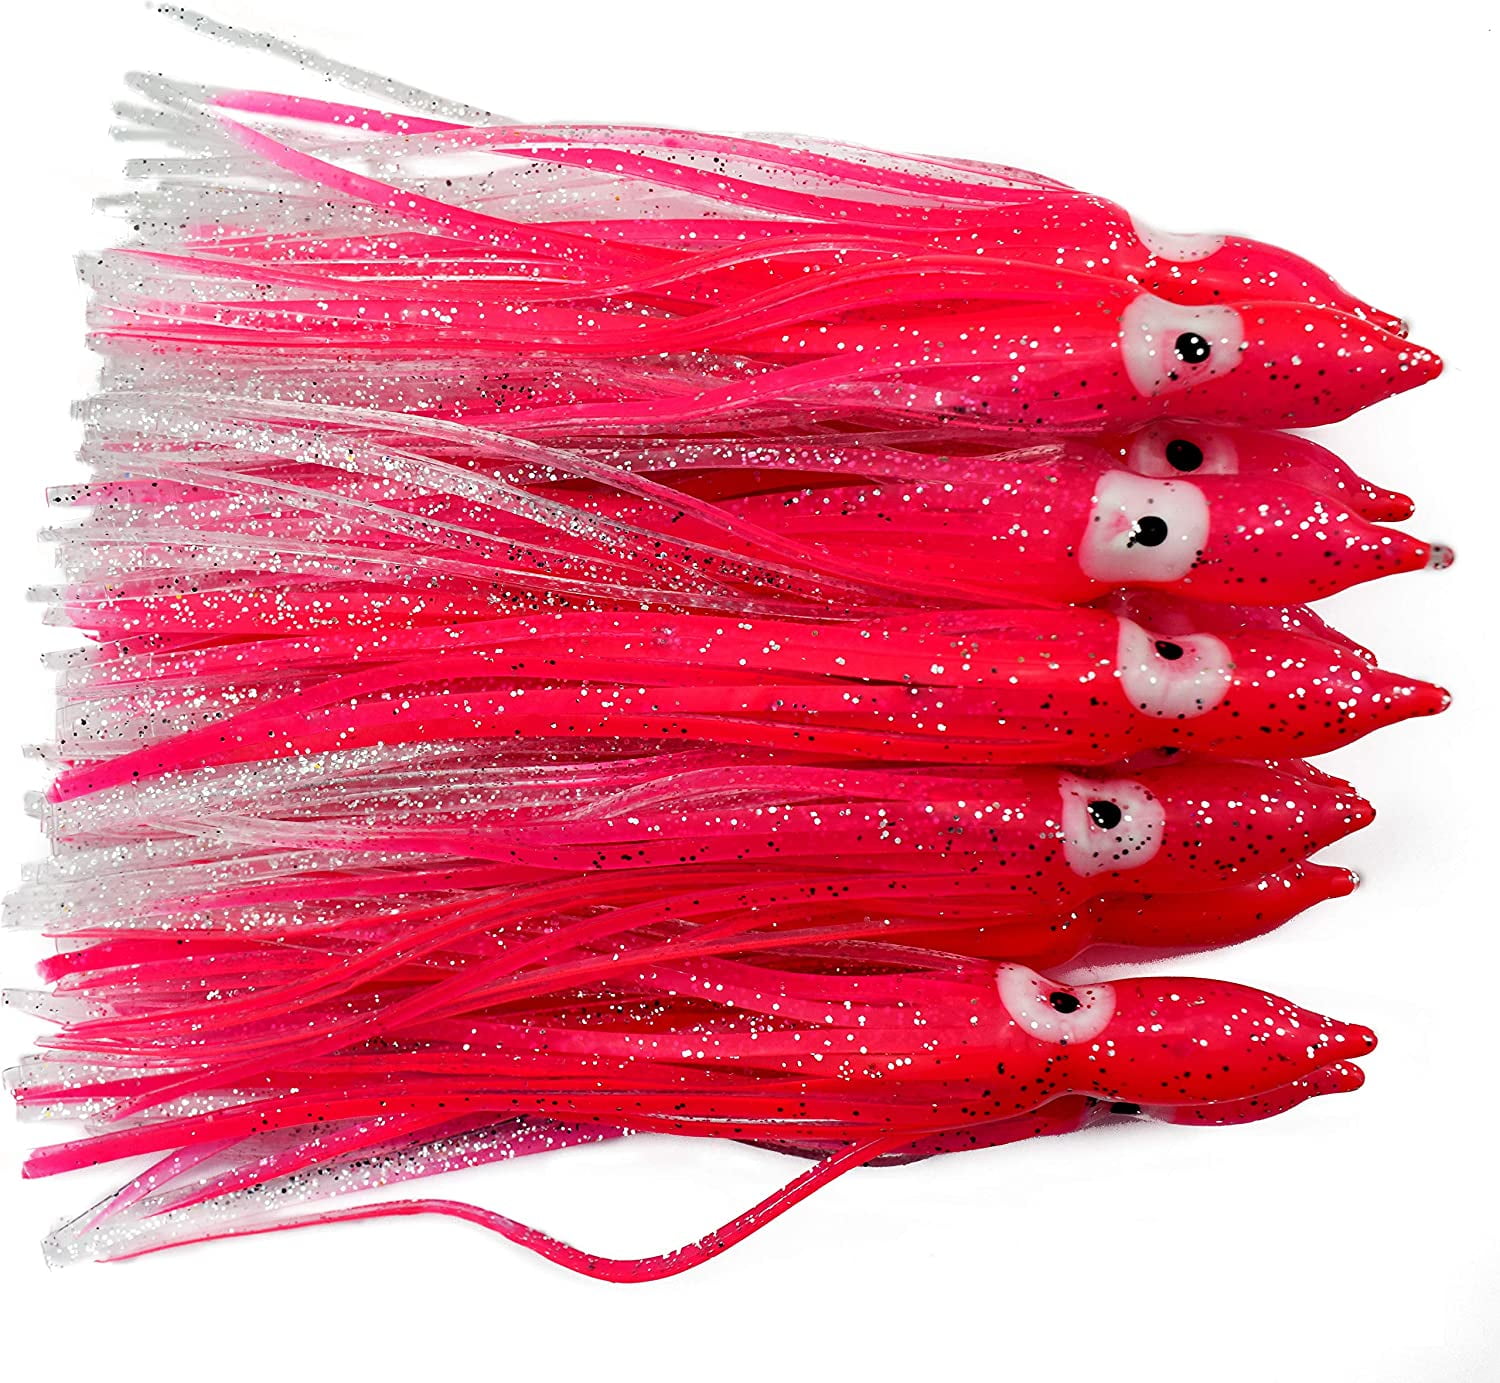 20pcs Squid Skirts Fishing Lure Trolling Fishing Lures Soft Octopus Baits  for Saltwater Fishing 6in/15CM (Transparent Pink) 